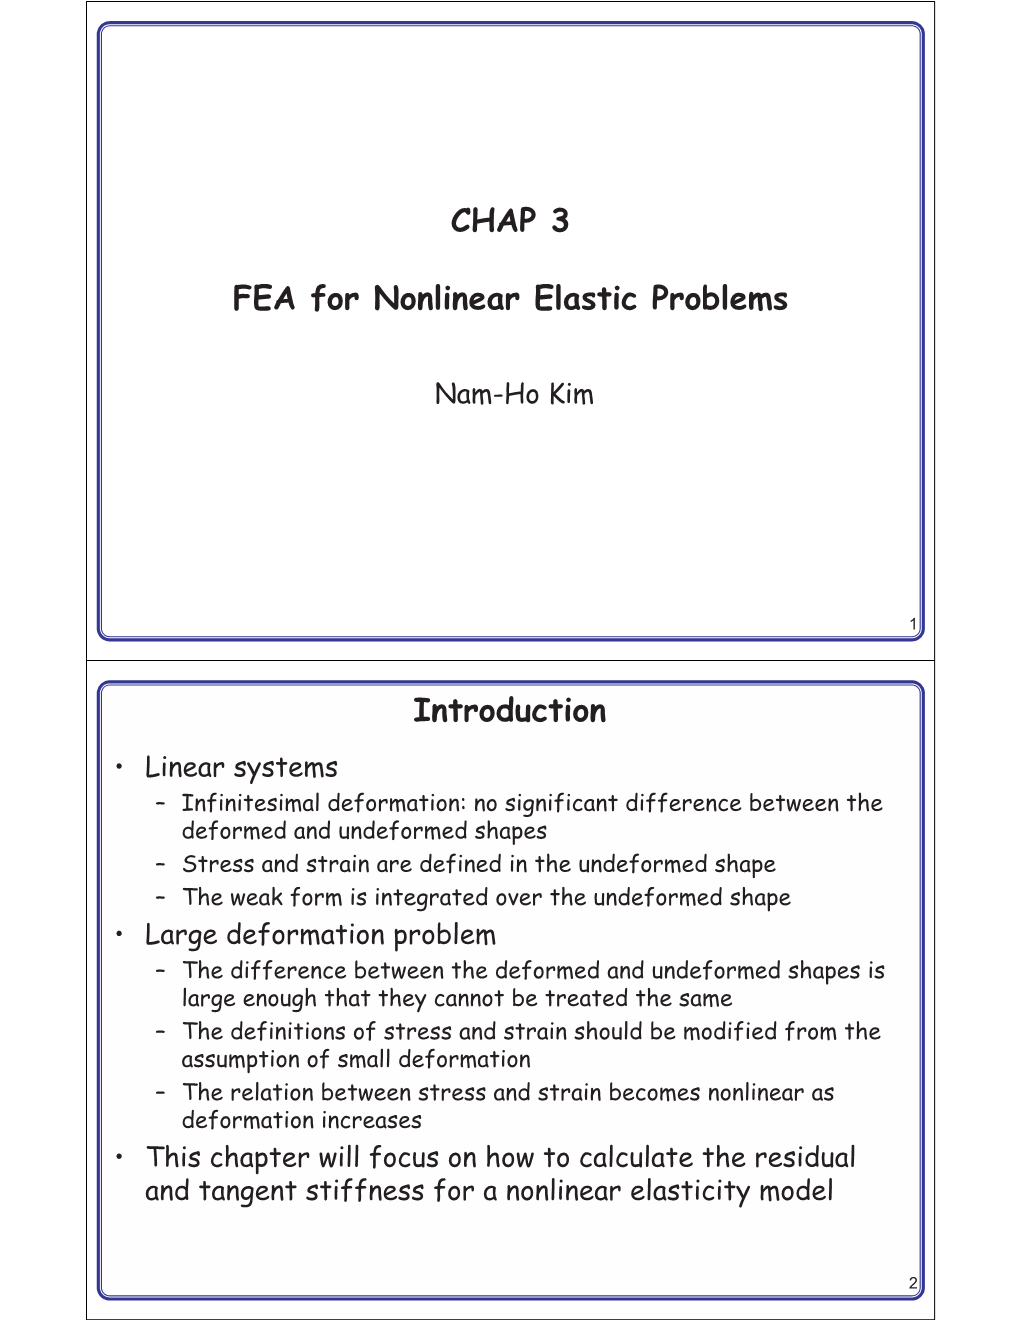 CHAP 3 FEA for Nonlinear Elastic Problems Introduction